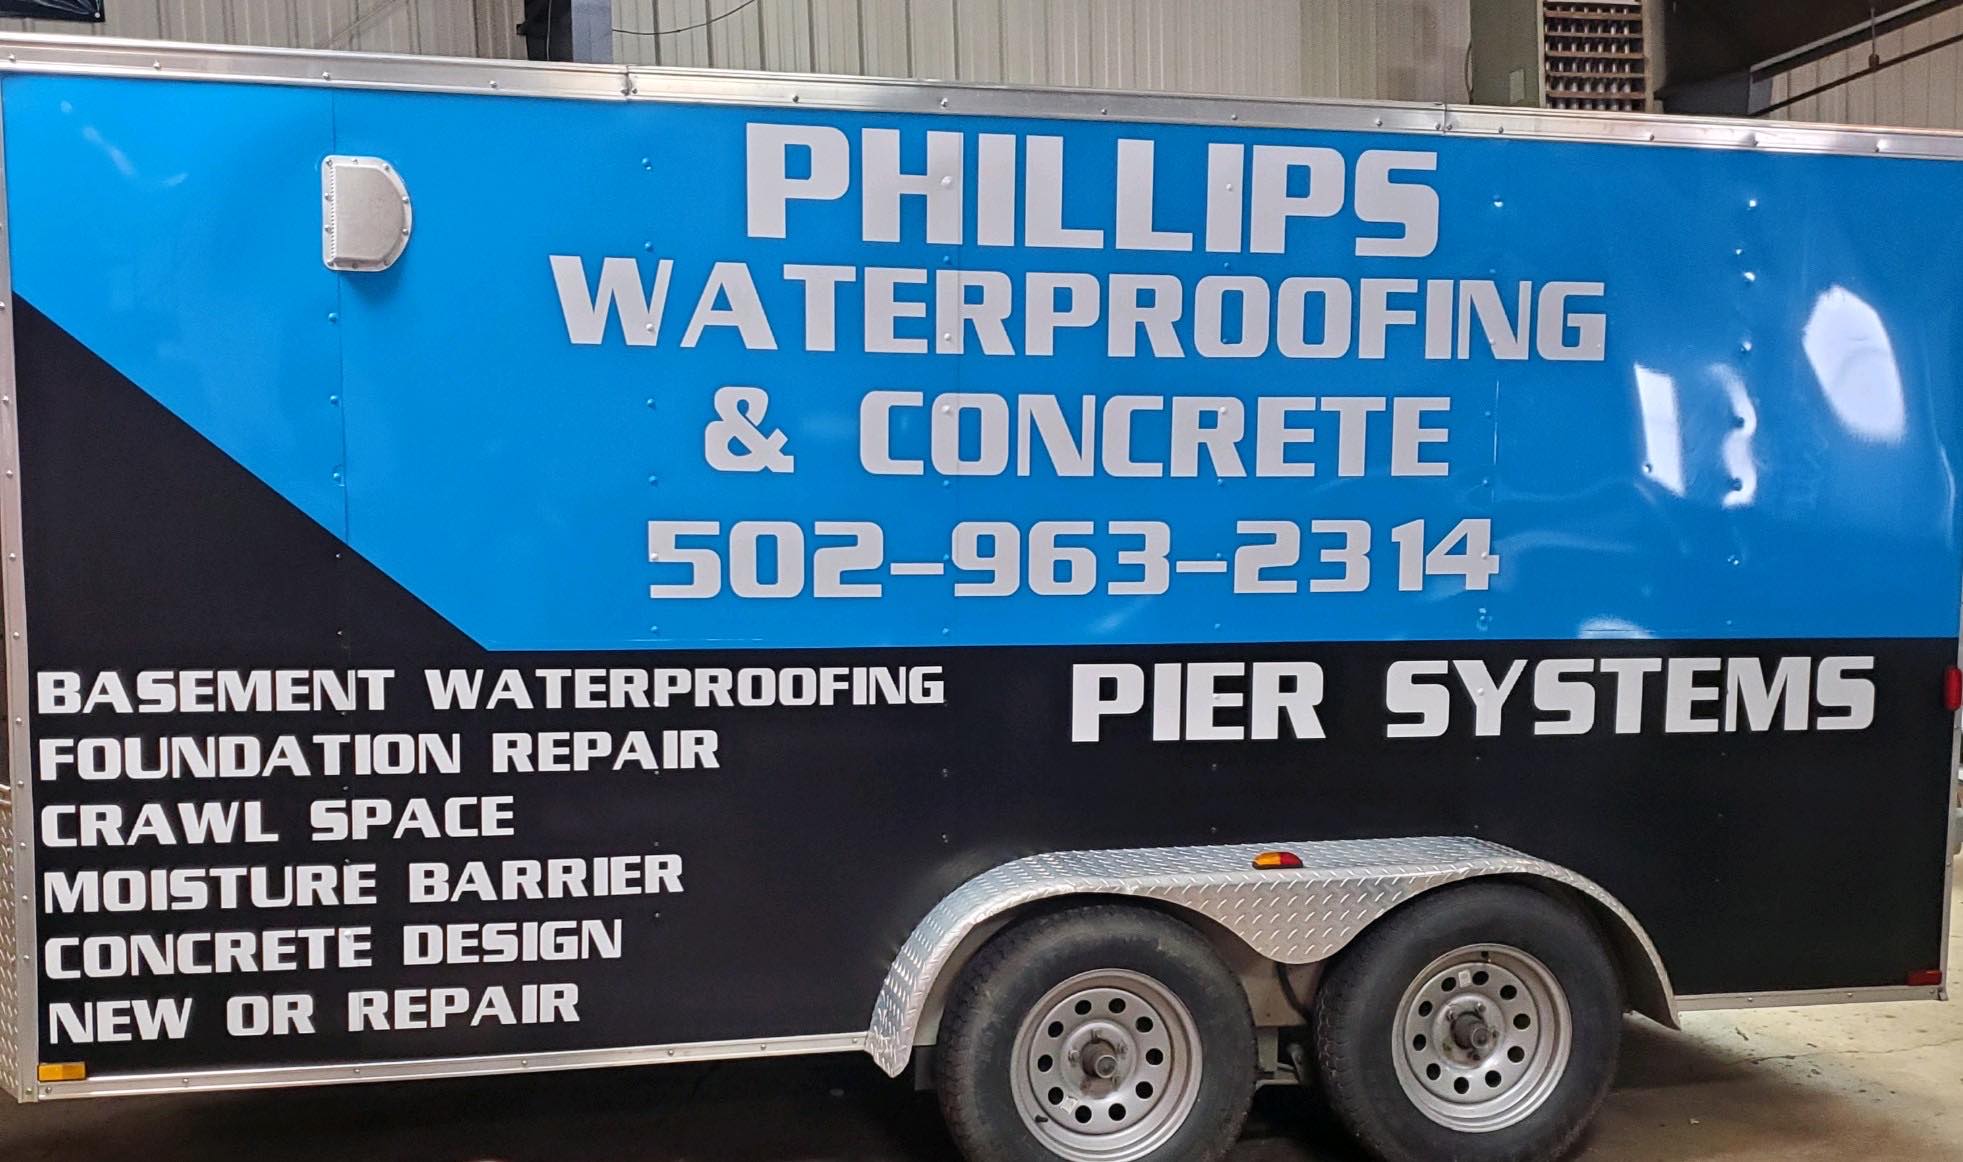 Phillips Waterproofing and Concrete Logo